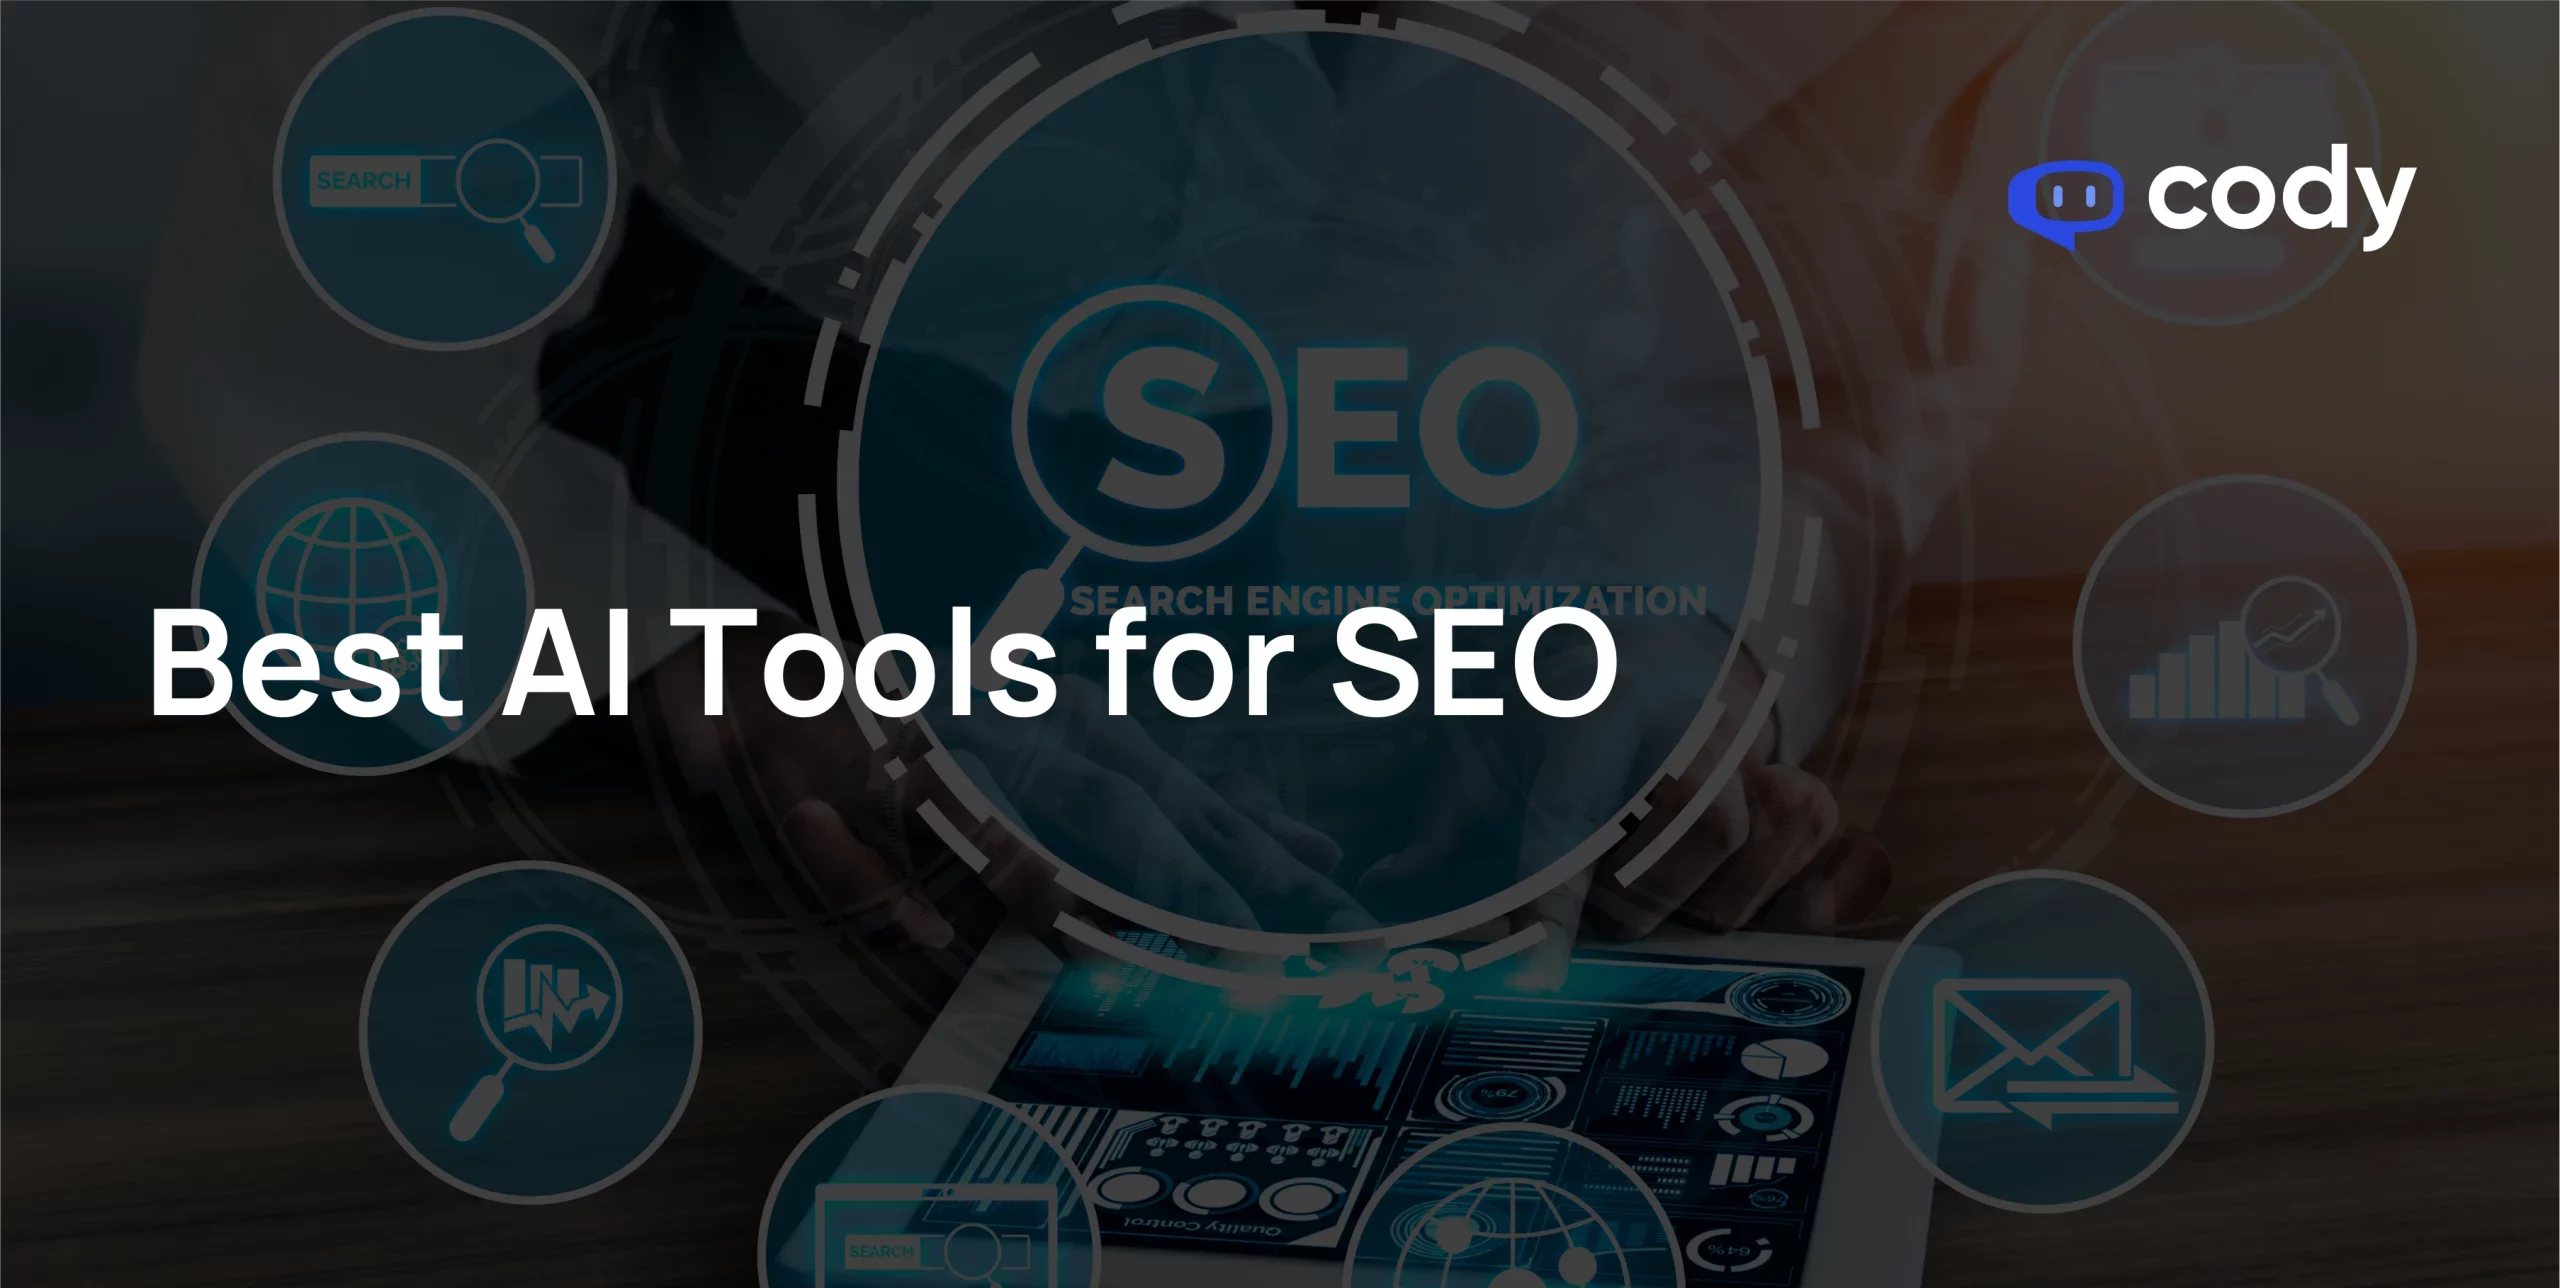 If you're also looking to use AI Tools for SEO, this blog will guide you to a number of AI-powered solutions to improve your SEO strategies.